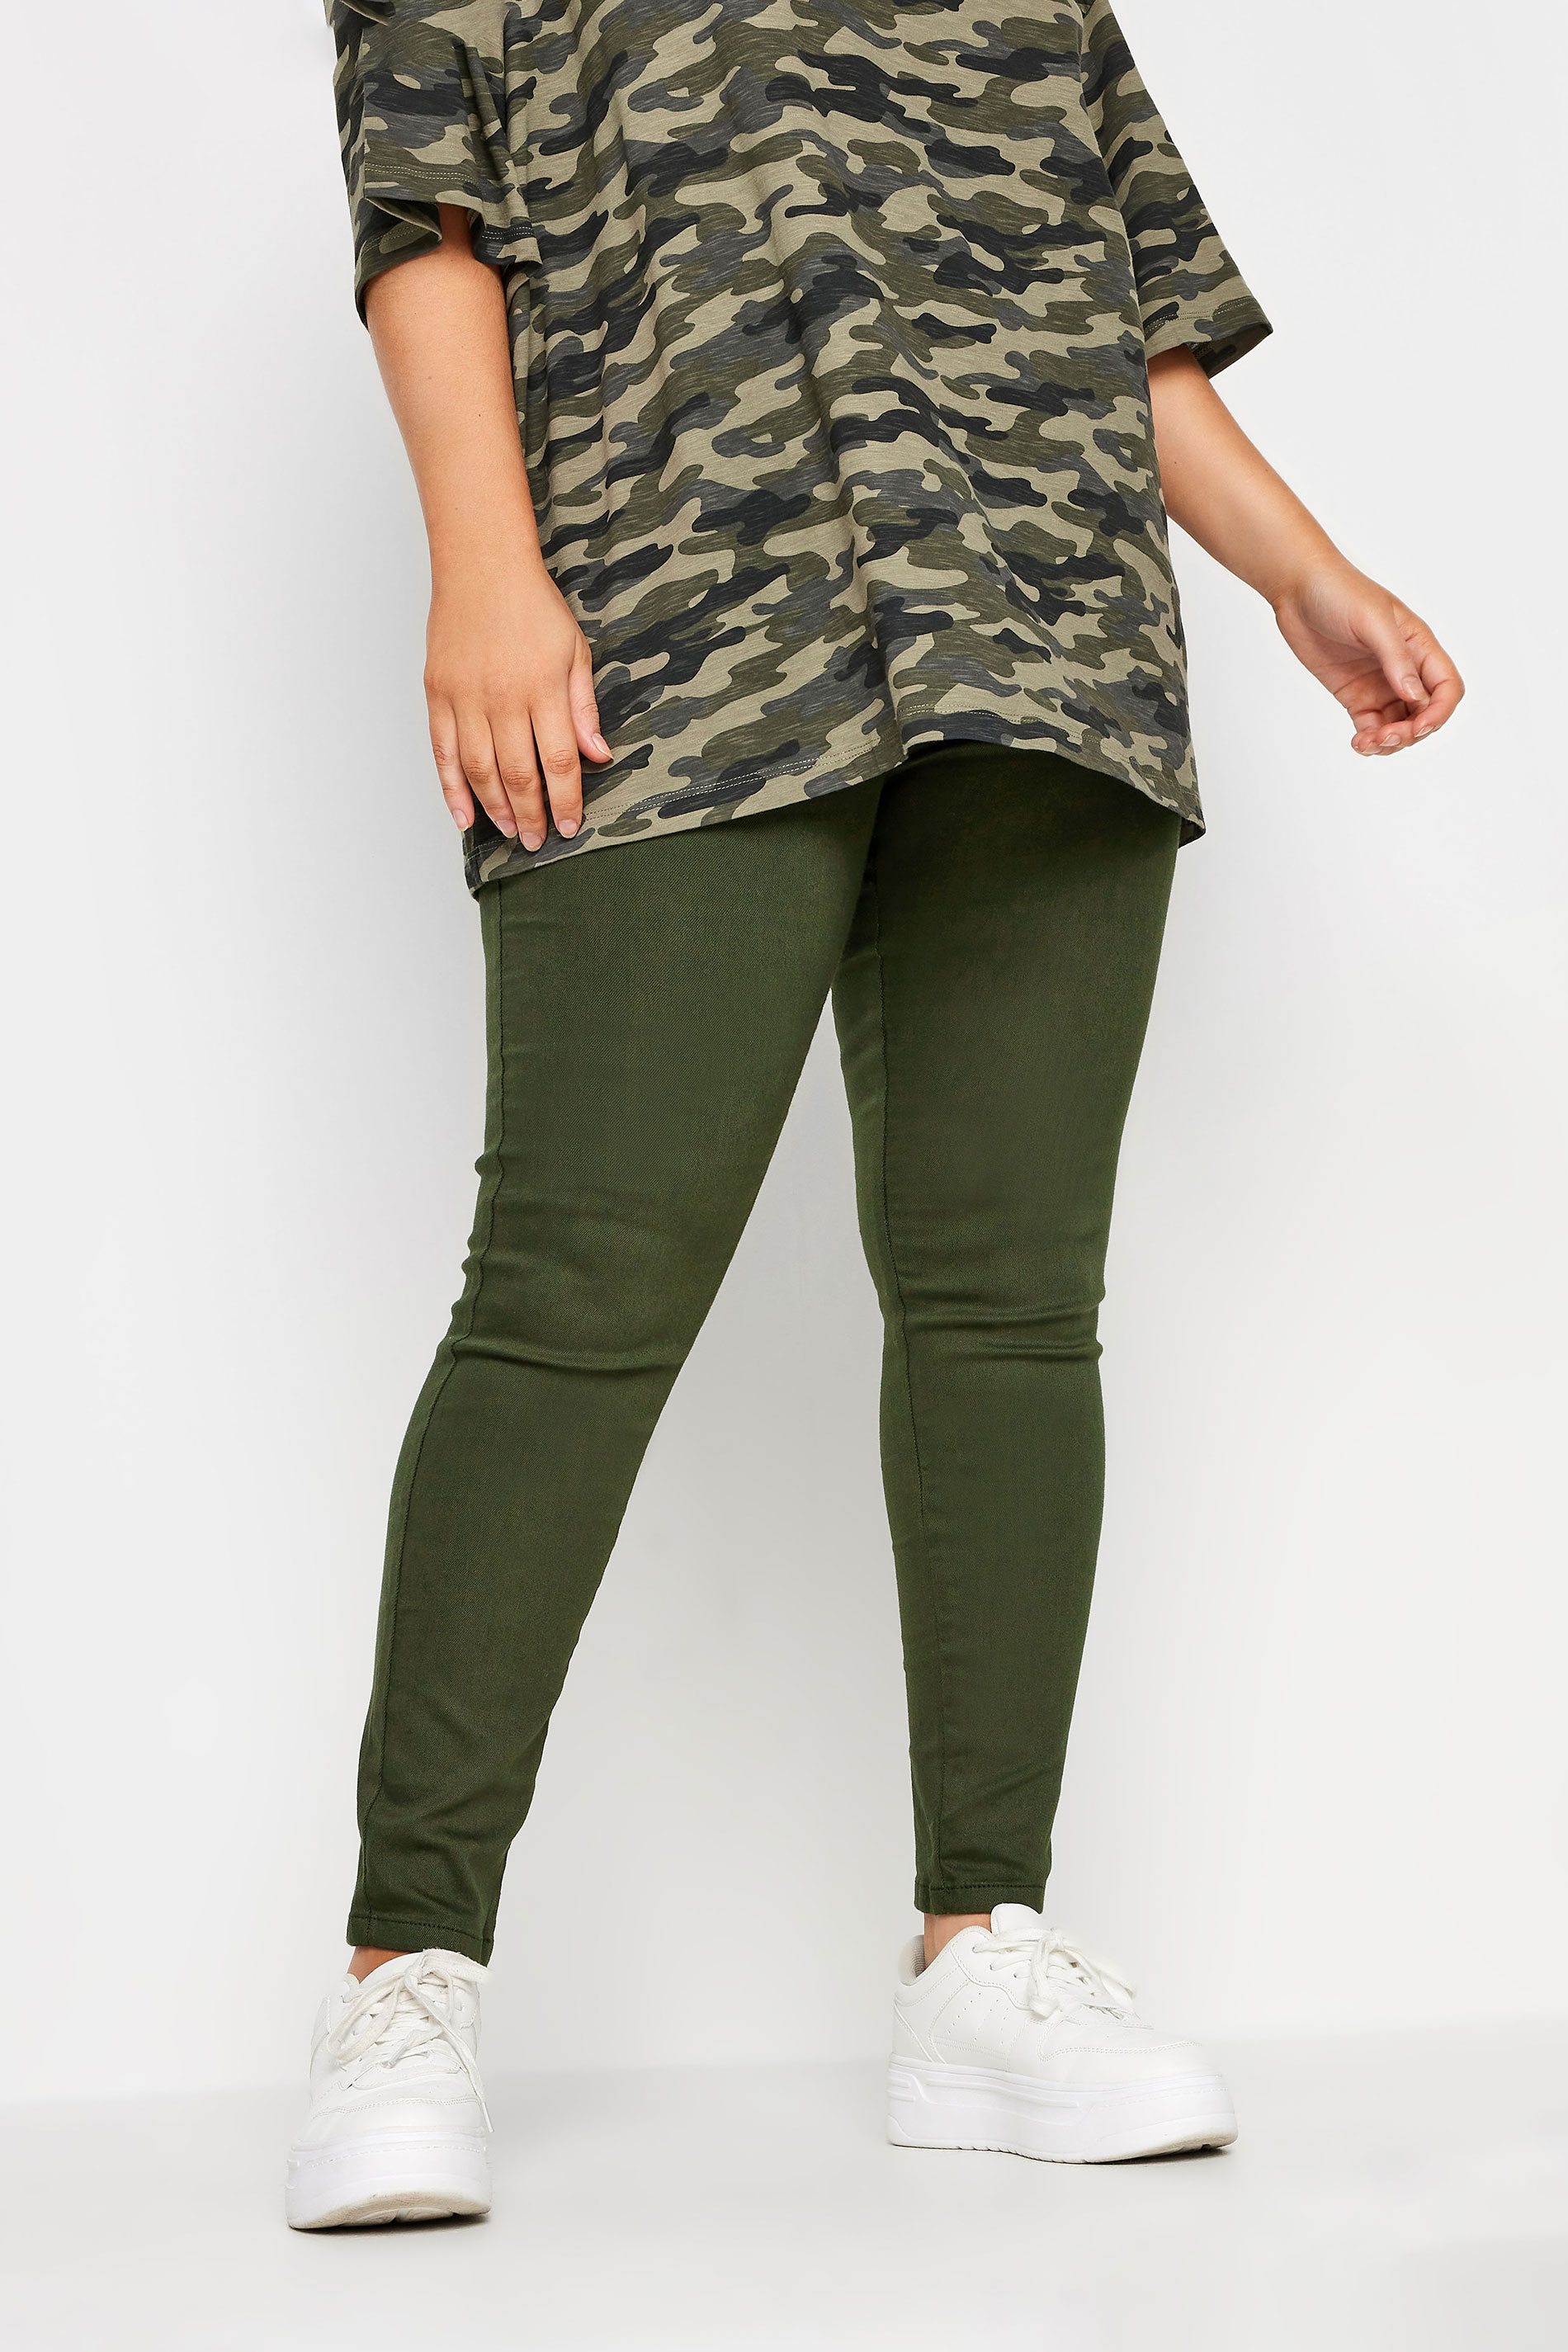 YOURS Plus Size Khaki Green Stretch Pull On GRACE Jeggings | Yours Clothing 1